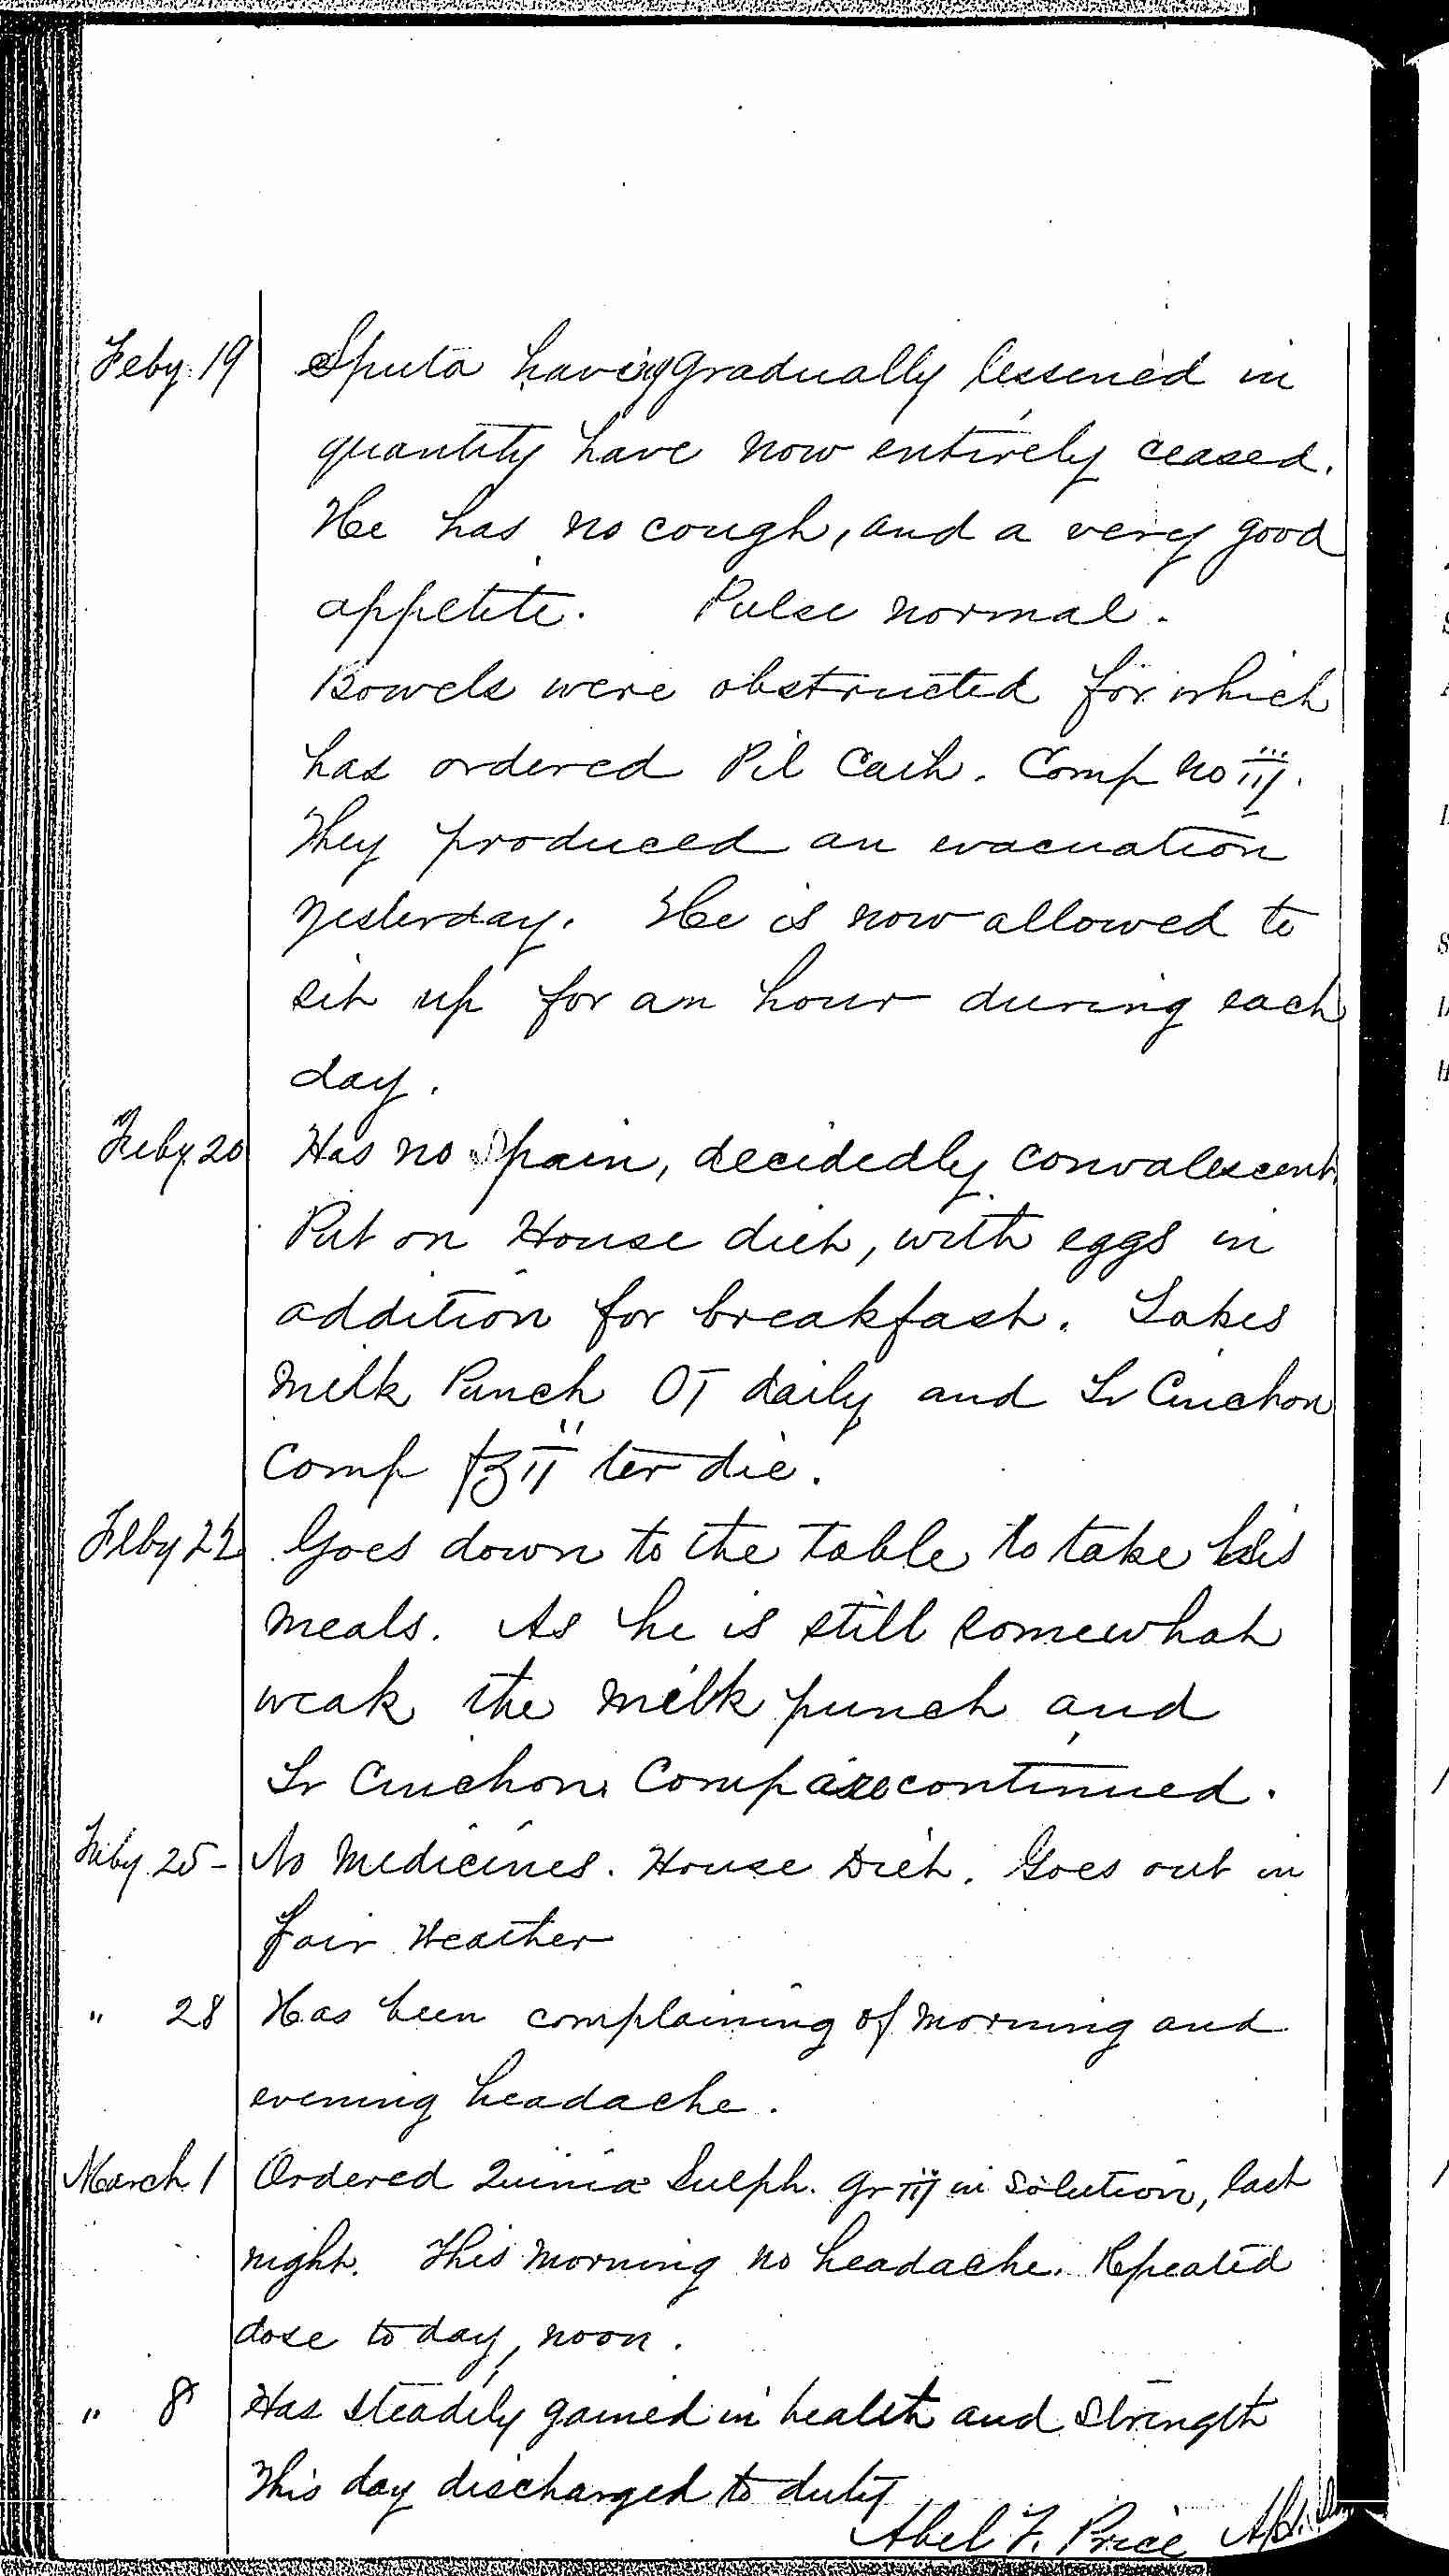 Entry for Theodore C. Waltenberg (page 4 of 4) in the log Hospital Tickets and Case Papers - Naval Hospital - Washington, D.C. - 1868-69